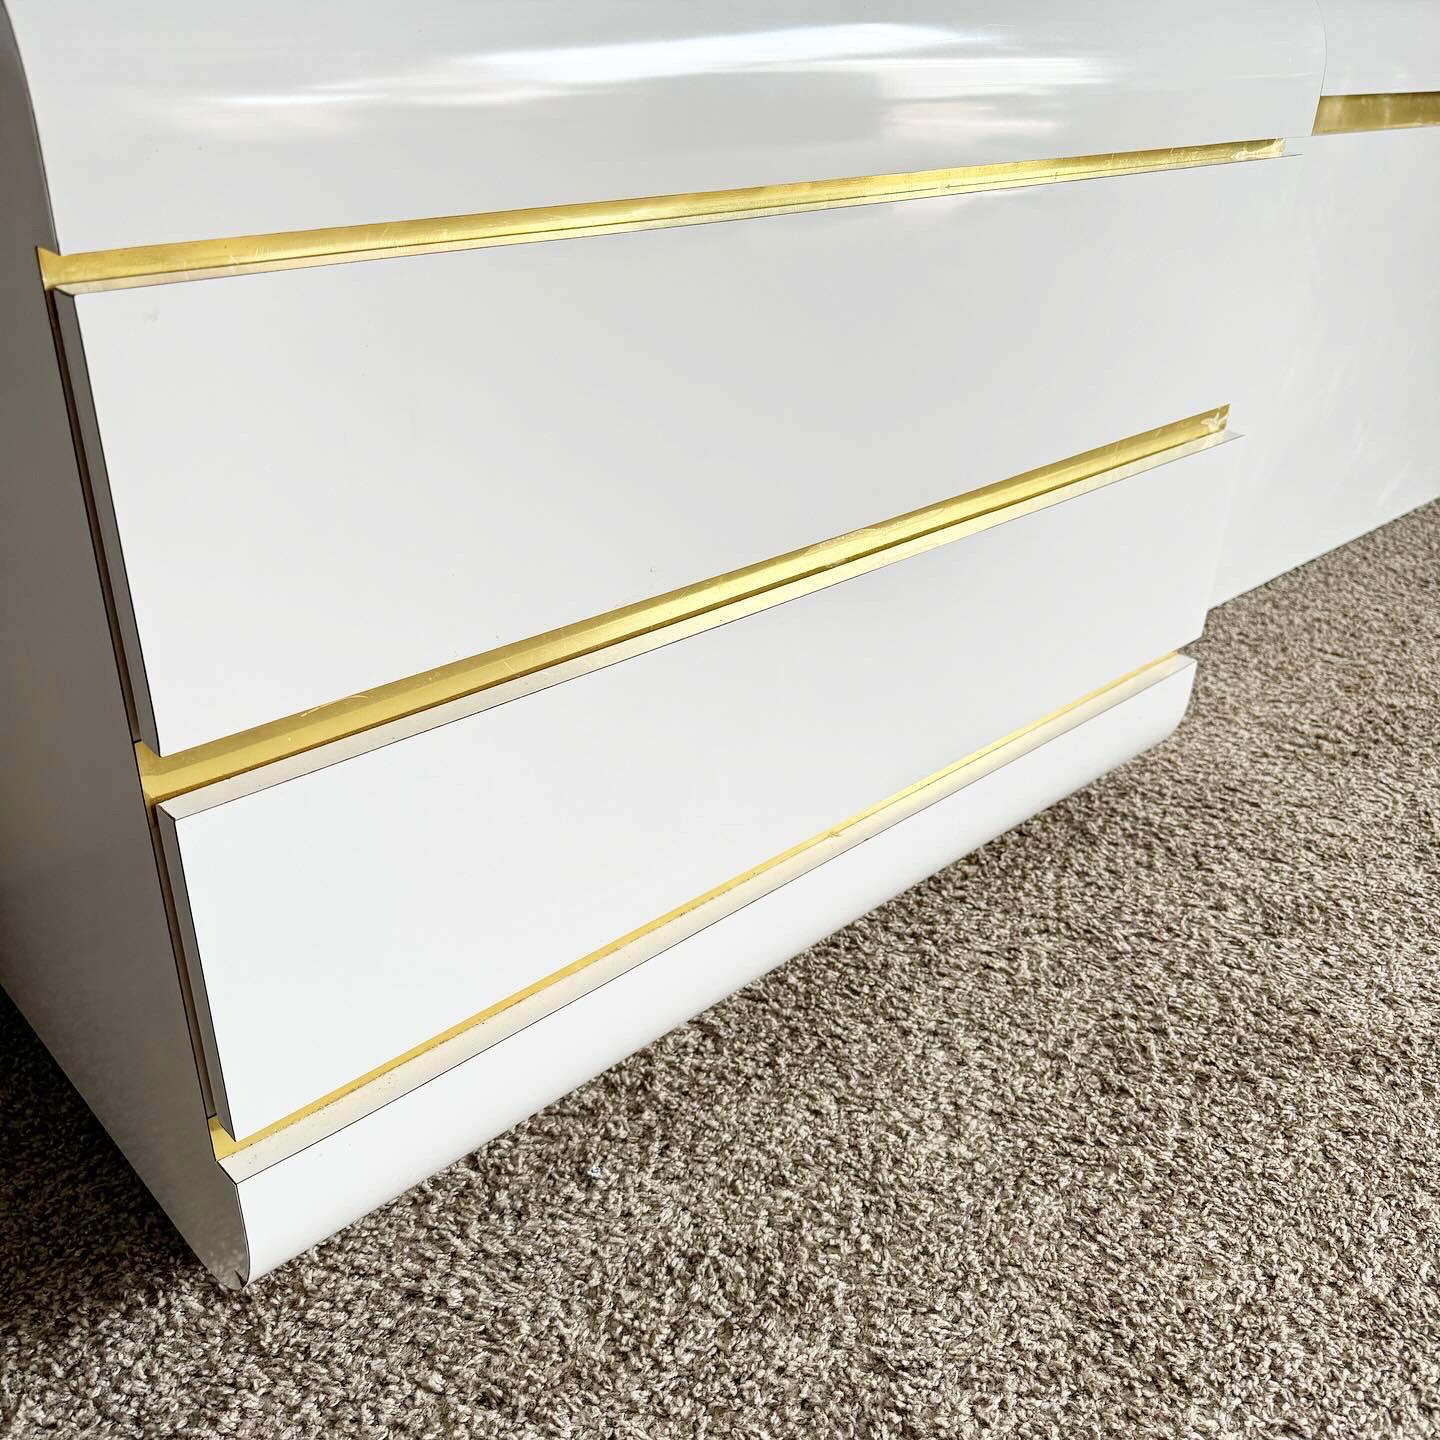 20th Century Postmodern White Lacquer Laminate King Storage Waterfall Headboard & Nightstands For Sale